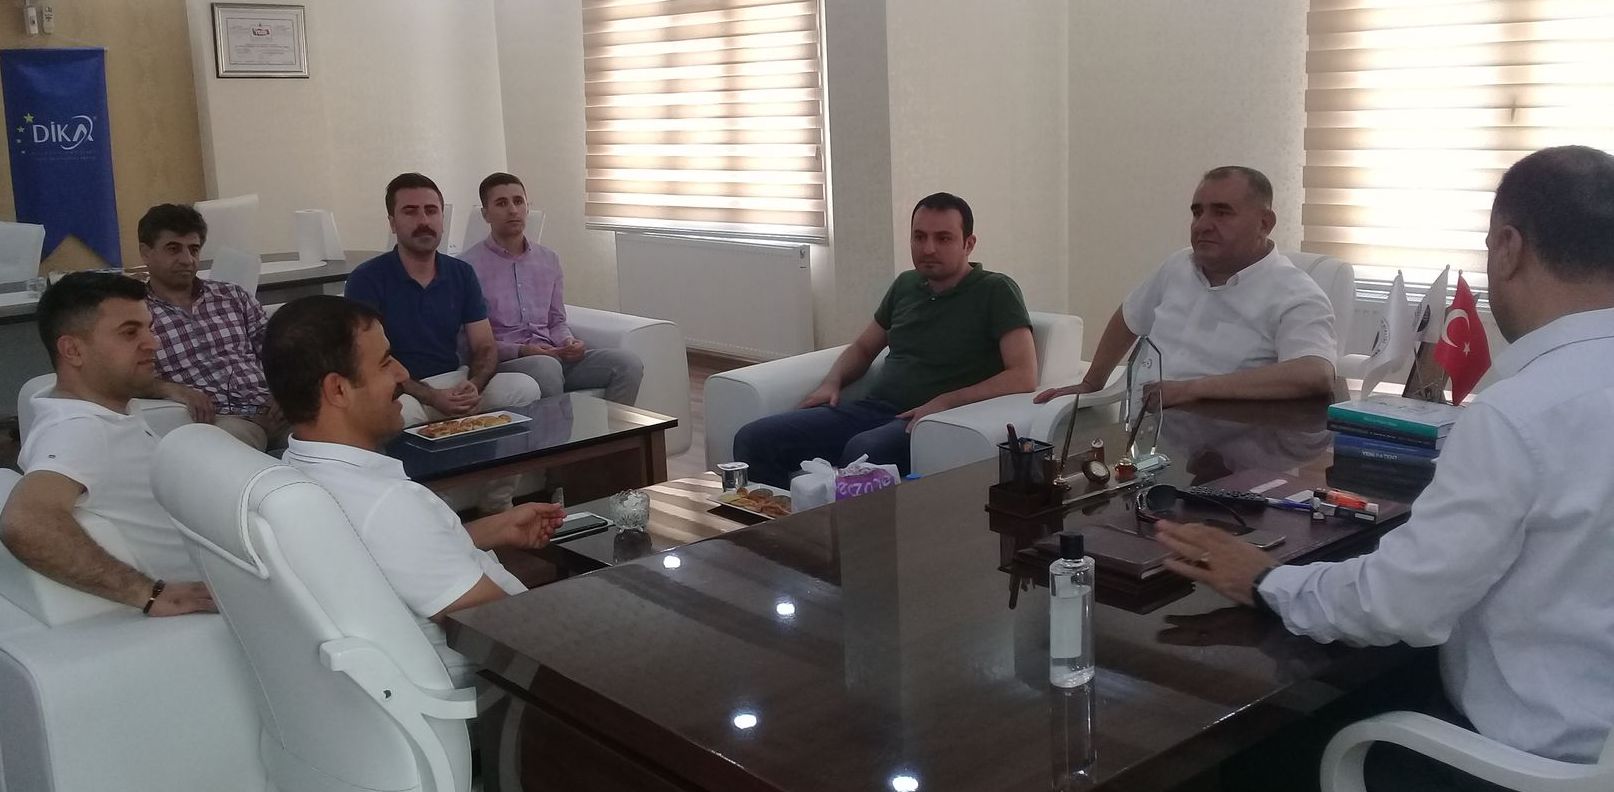 MARDIN CHAMBER OF COMMERCE CONCENTRATES ON FOREIGN TRADE PROJECTS FOR THE MEMBERS OF THE JOINT PROJECT TEAM